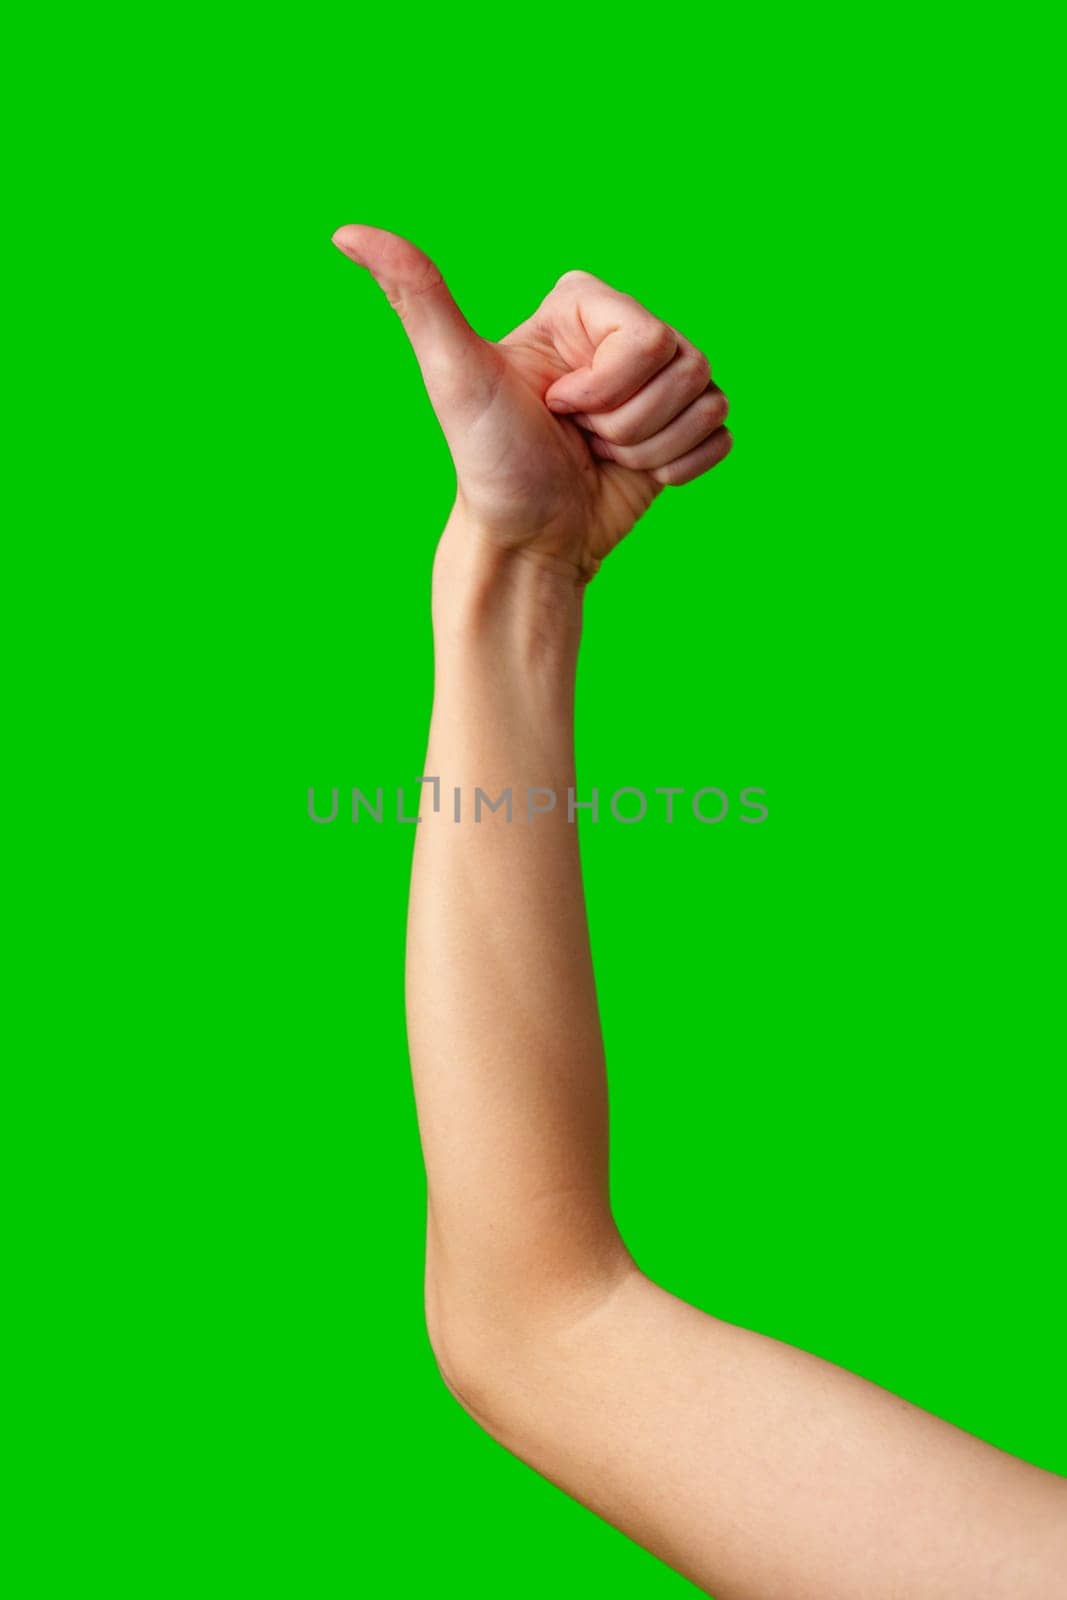 A close-up view captures the extended arm of an individual showing a thumbs up sign, denoting approval or success. The arm is poised against a vibrant green screen backdrop which is commonly used for chroma key compositing in video production and photography.